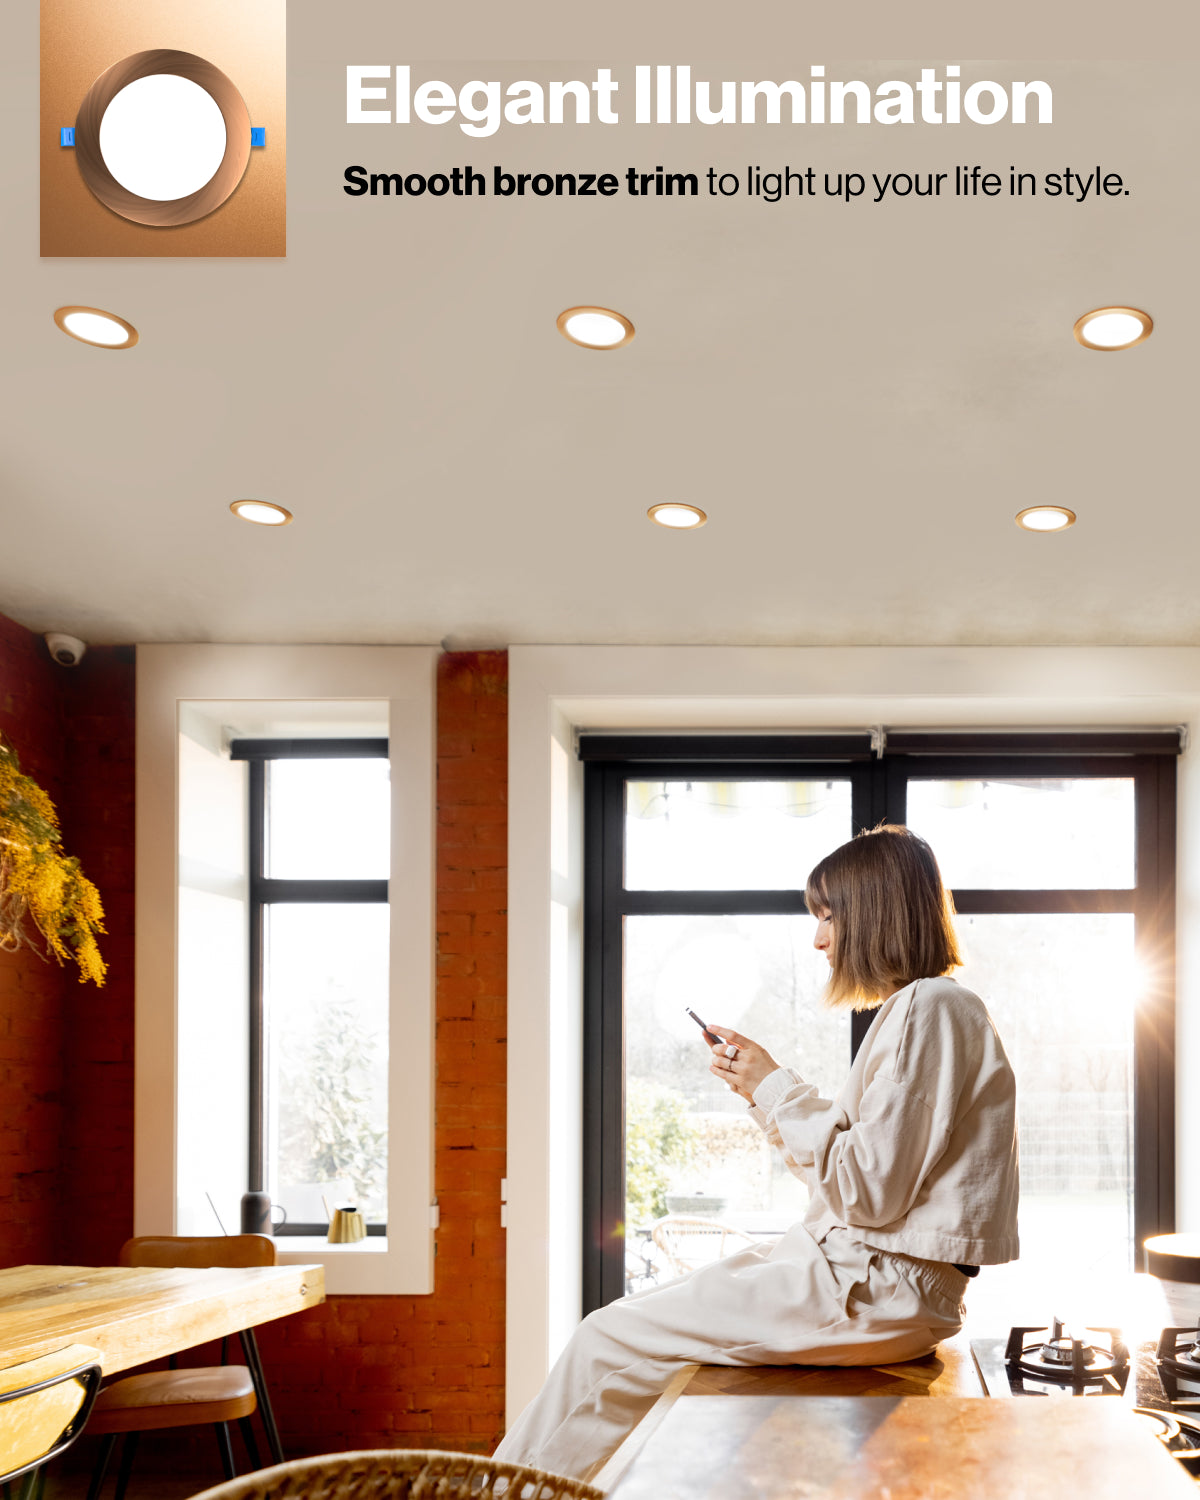 Sunco Lighting Bronze Trim Slim Selectable Downlight Suitable in Spaces for Any Lifestyle